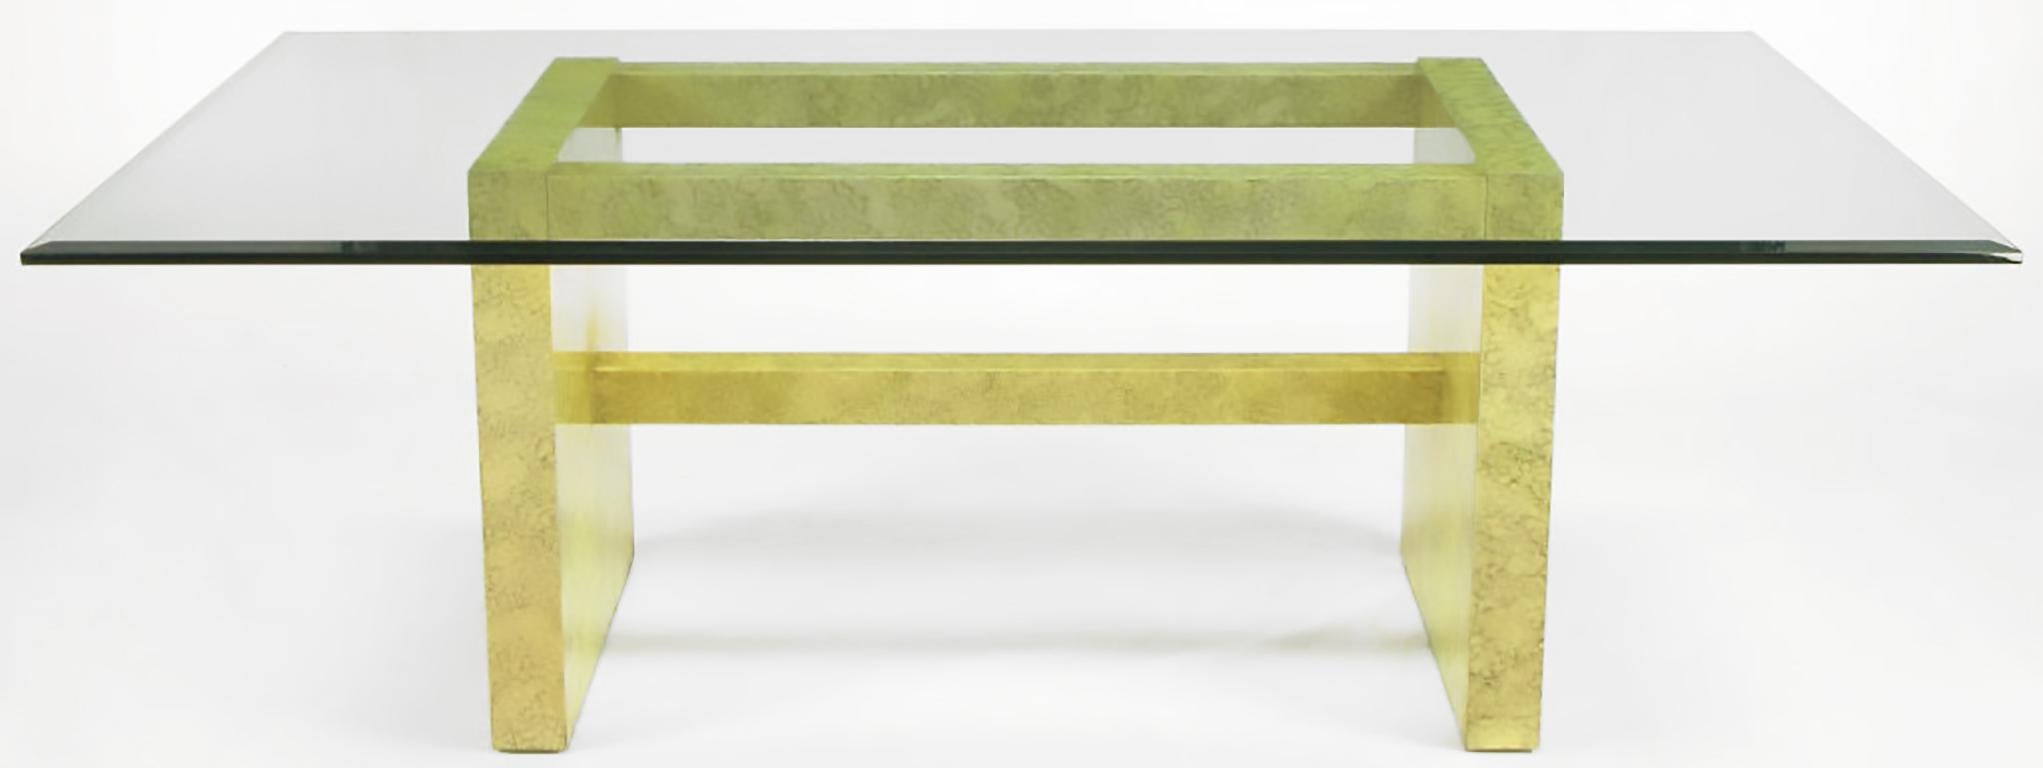 Mid-Century Modern Henredon circa 1975 Glass and Marbleized Base Dining Table For Sale